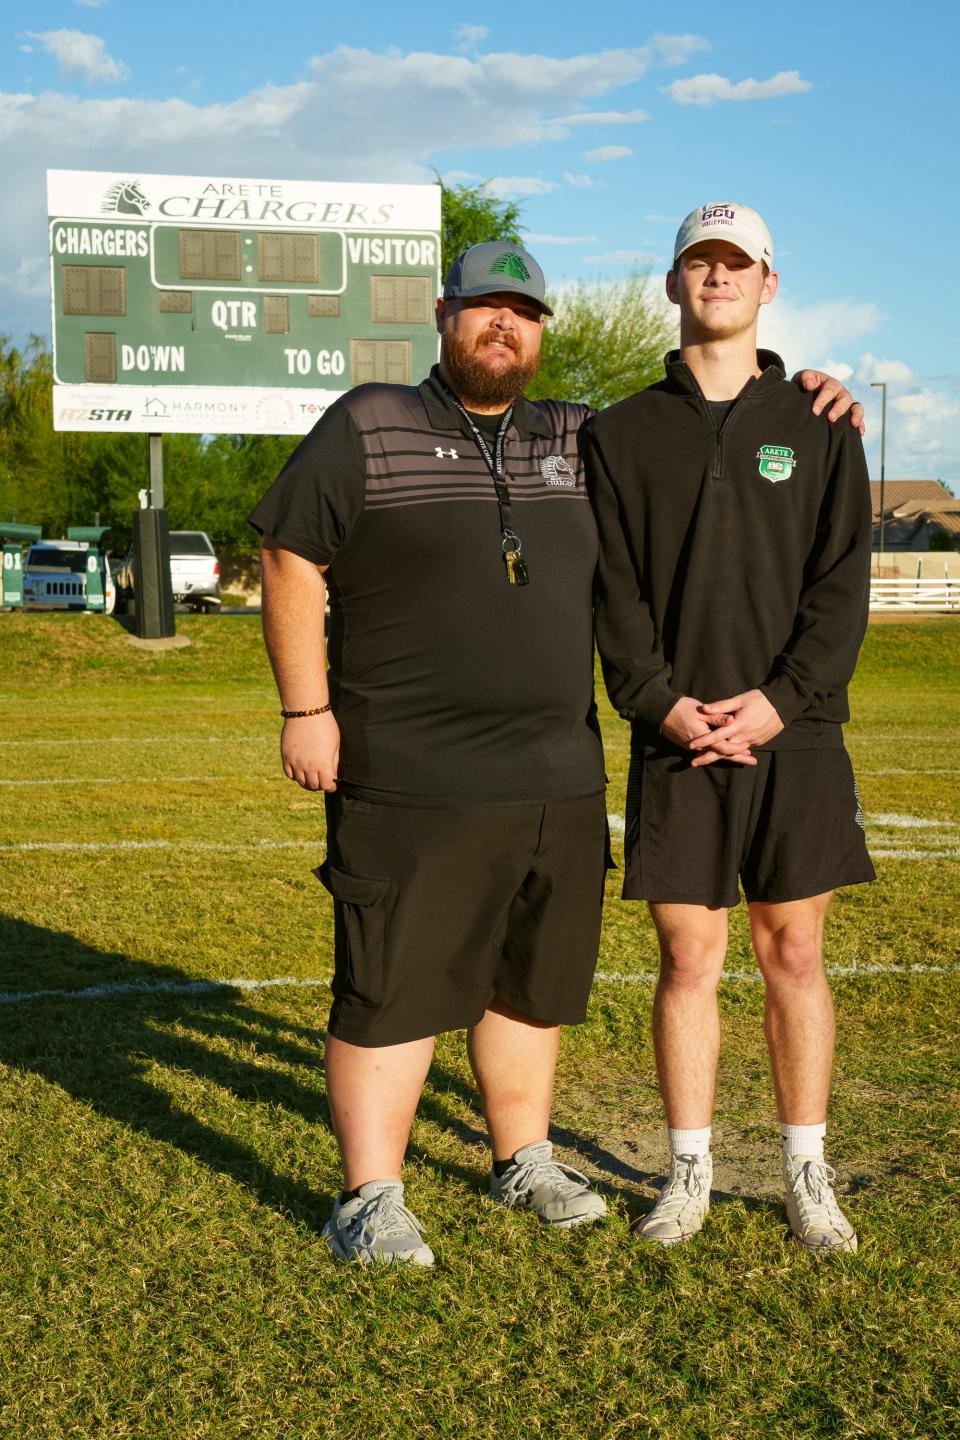 Aiden Wander (right), and his father Jeremy Wander (left), pose for a portrait at the Arete Prep Cangers' football field on Oct. 10, 2022, in Gilbert.